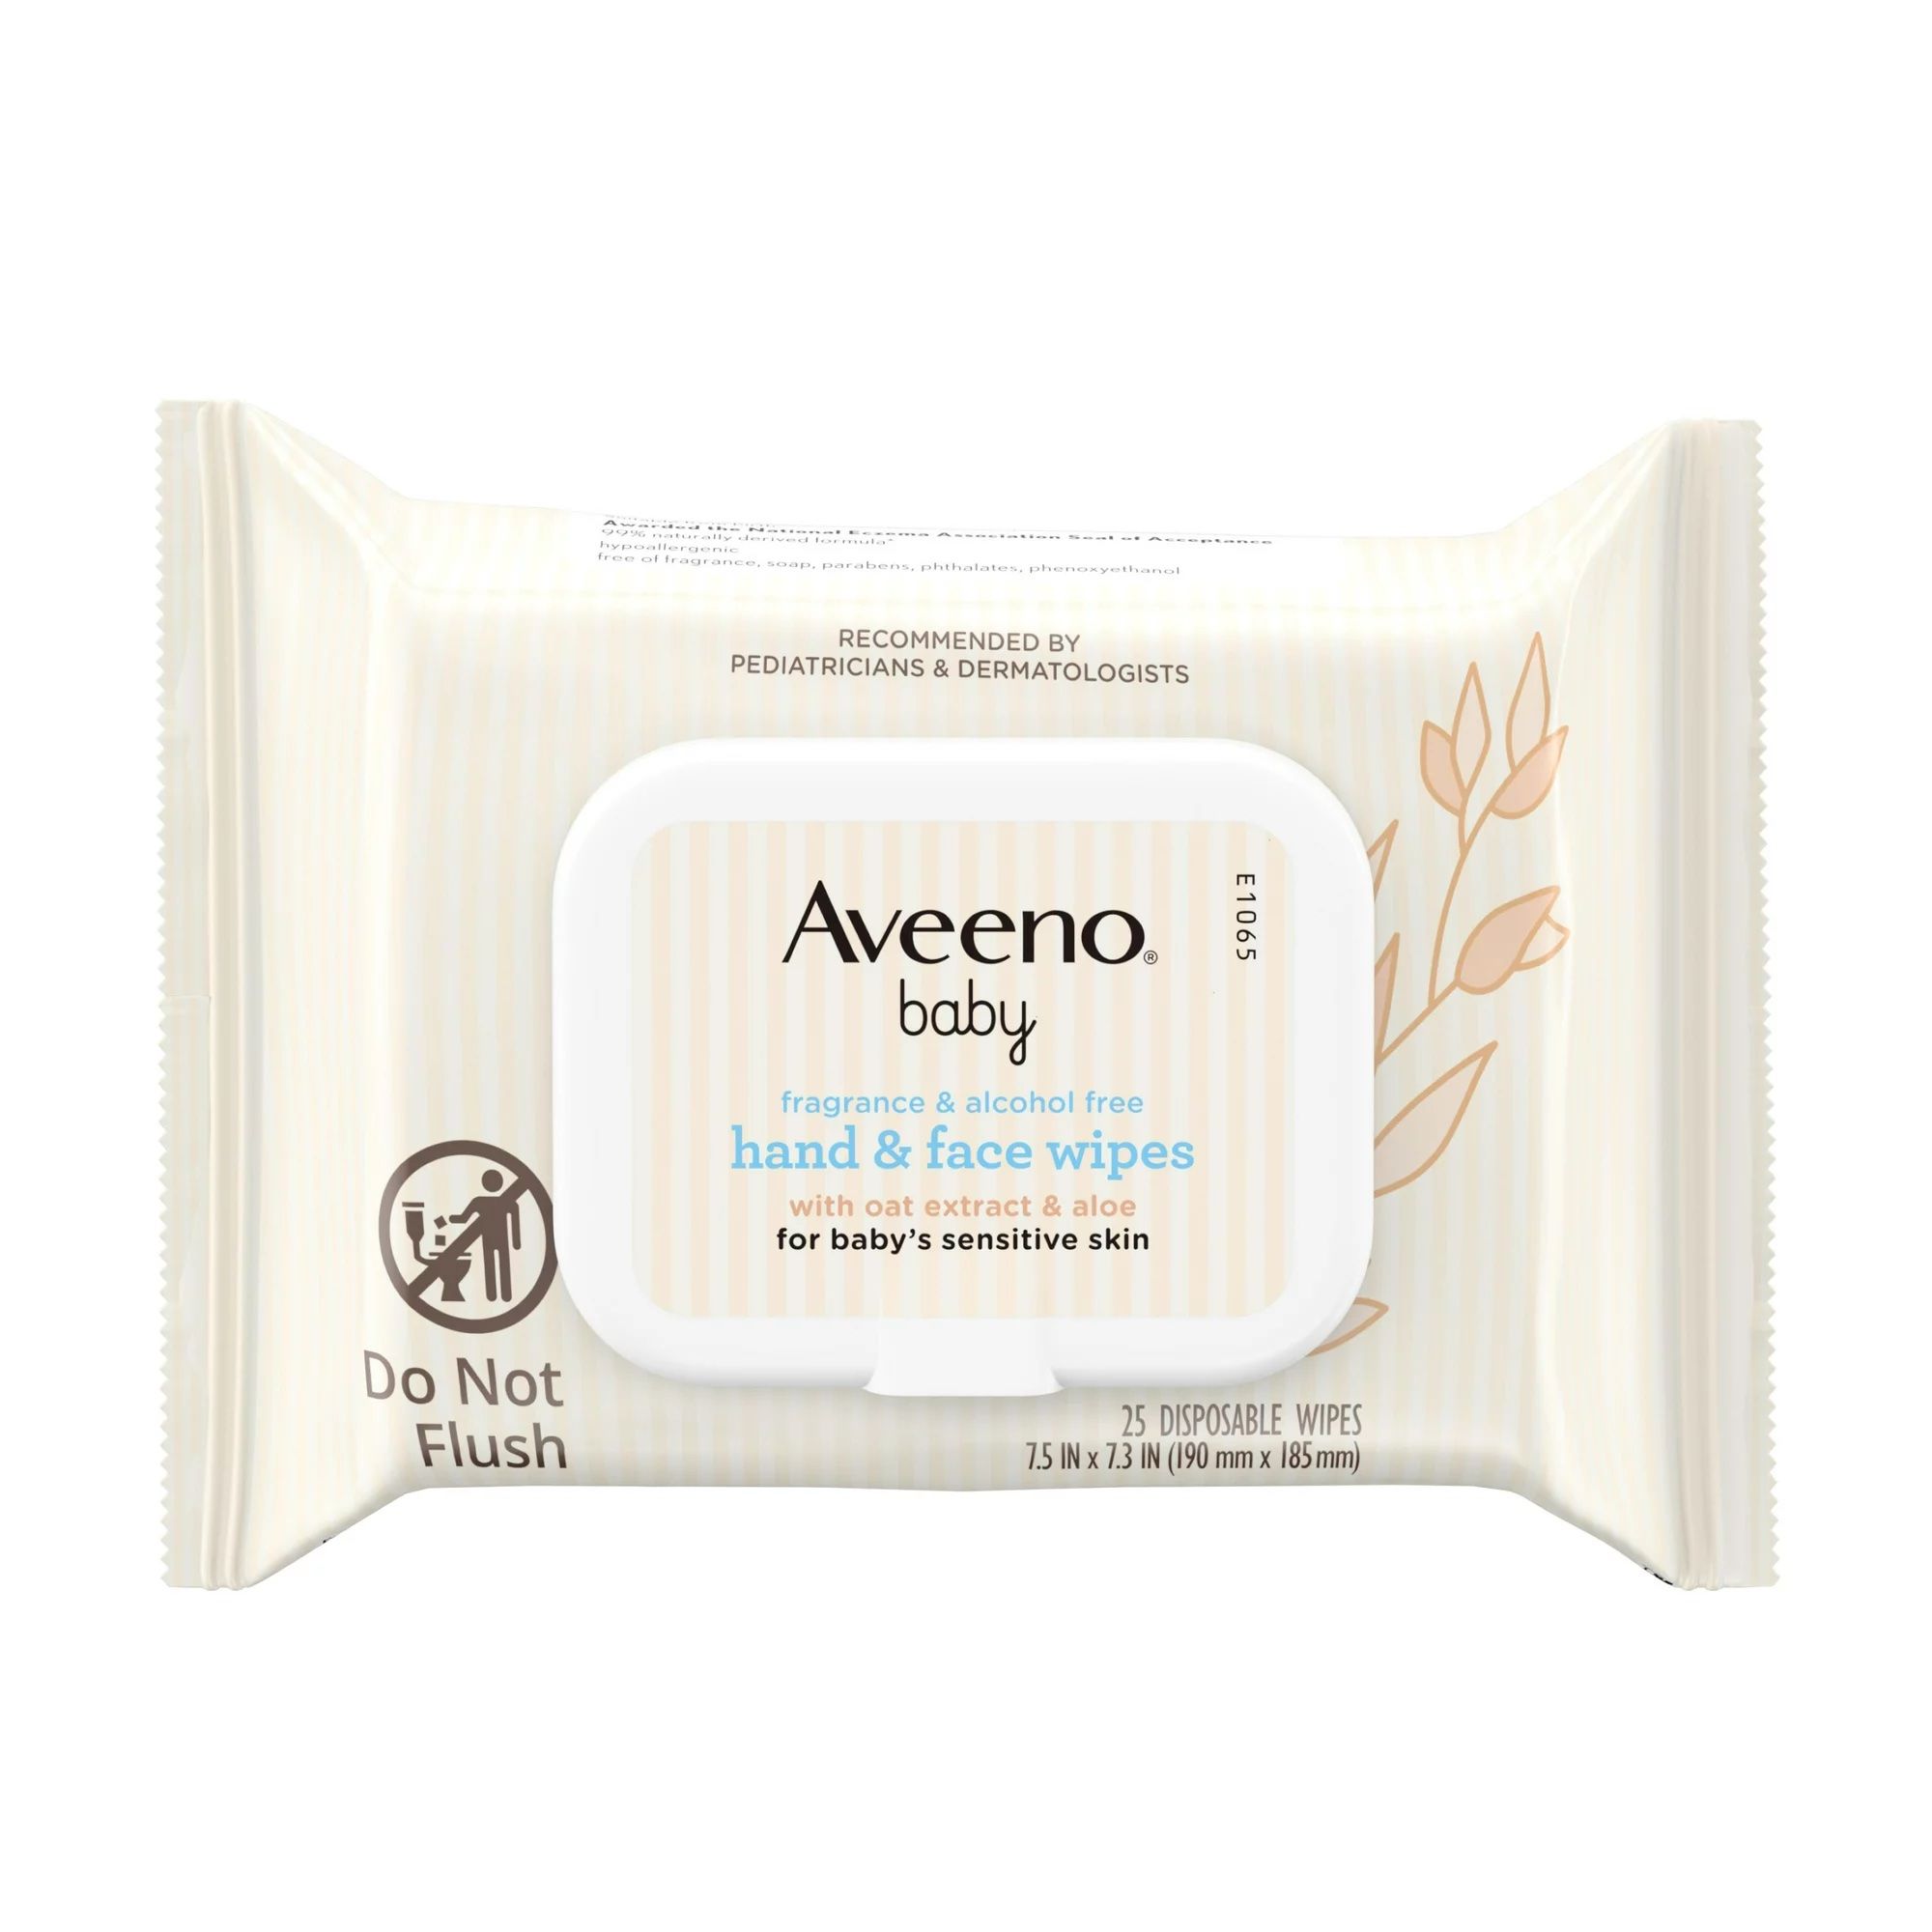 Aveeno Hand & Face Baby Wipes with Oat Extract, Fragrance Free, 1 Pack - 25 ct